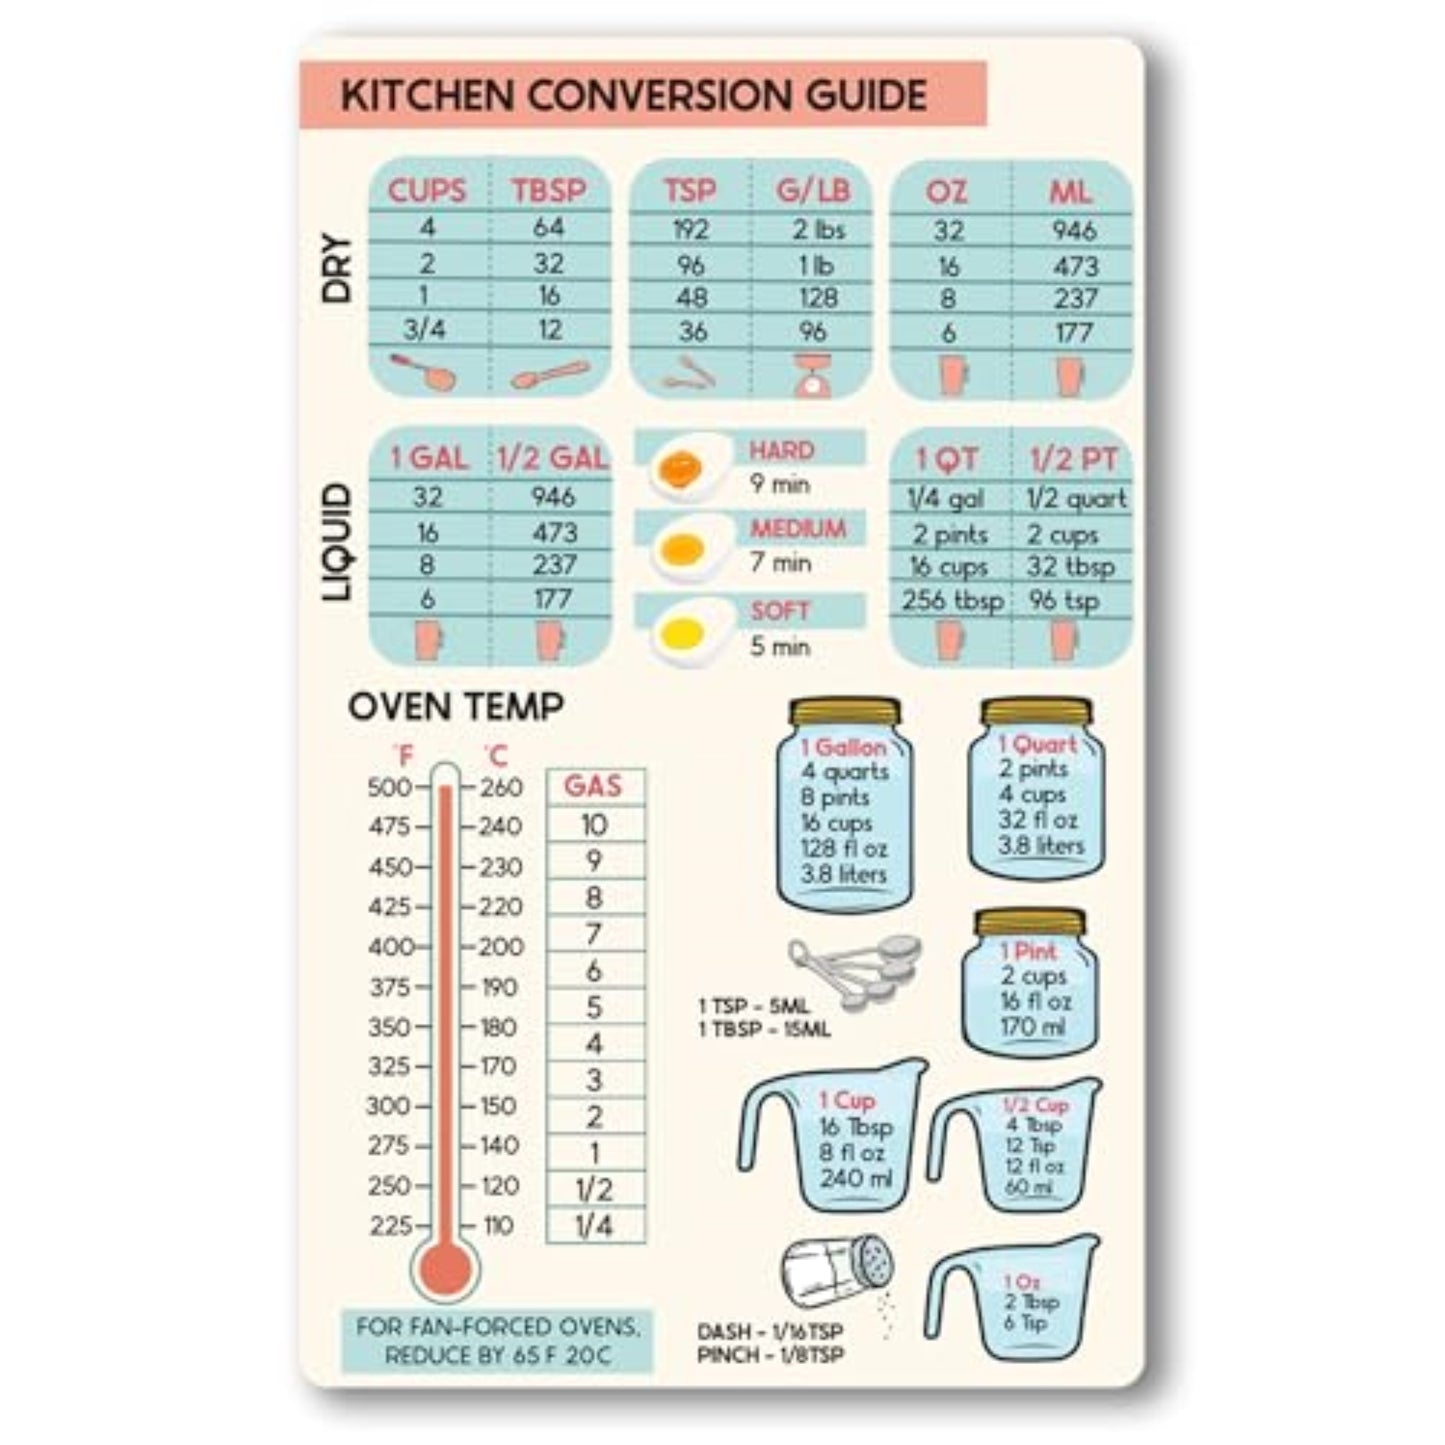 Magnet Me Up Large Blue and Pink Kitchen Conversion Chart, 5x8 Magnet Decal, Cute Baking Gift and Measurement Recipe Accessory, Perfect for Refrigerator, Dishwasher or Any Other Magnetic Surface